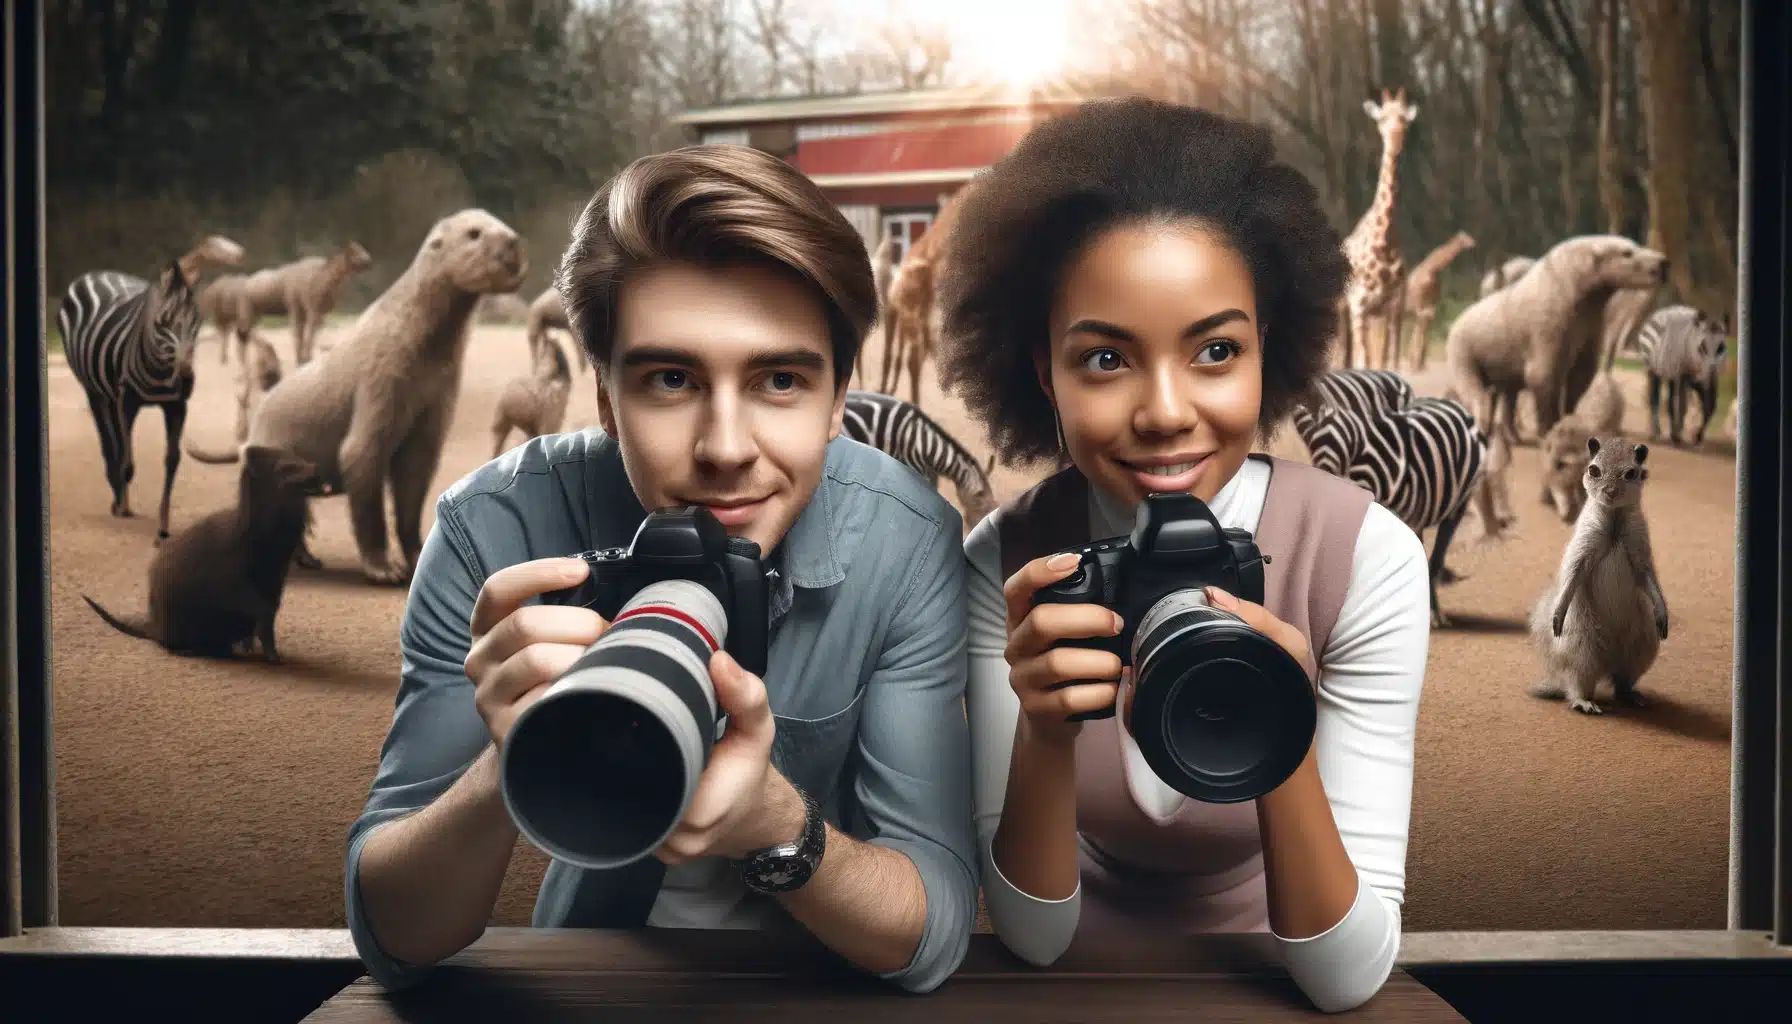 A Caucasian male and an African American female, both photographers in their twenties at a zoo, use different lenses to capture animals, illustrating depth of field with sharp focus on the photographers and a blurred animal background, showcasing focal length and aperture adjustments.